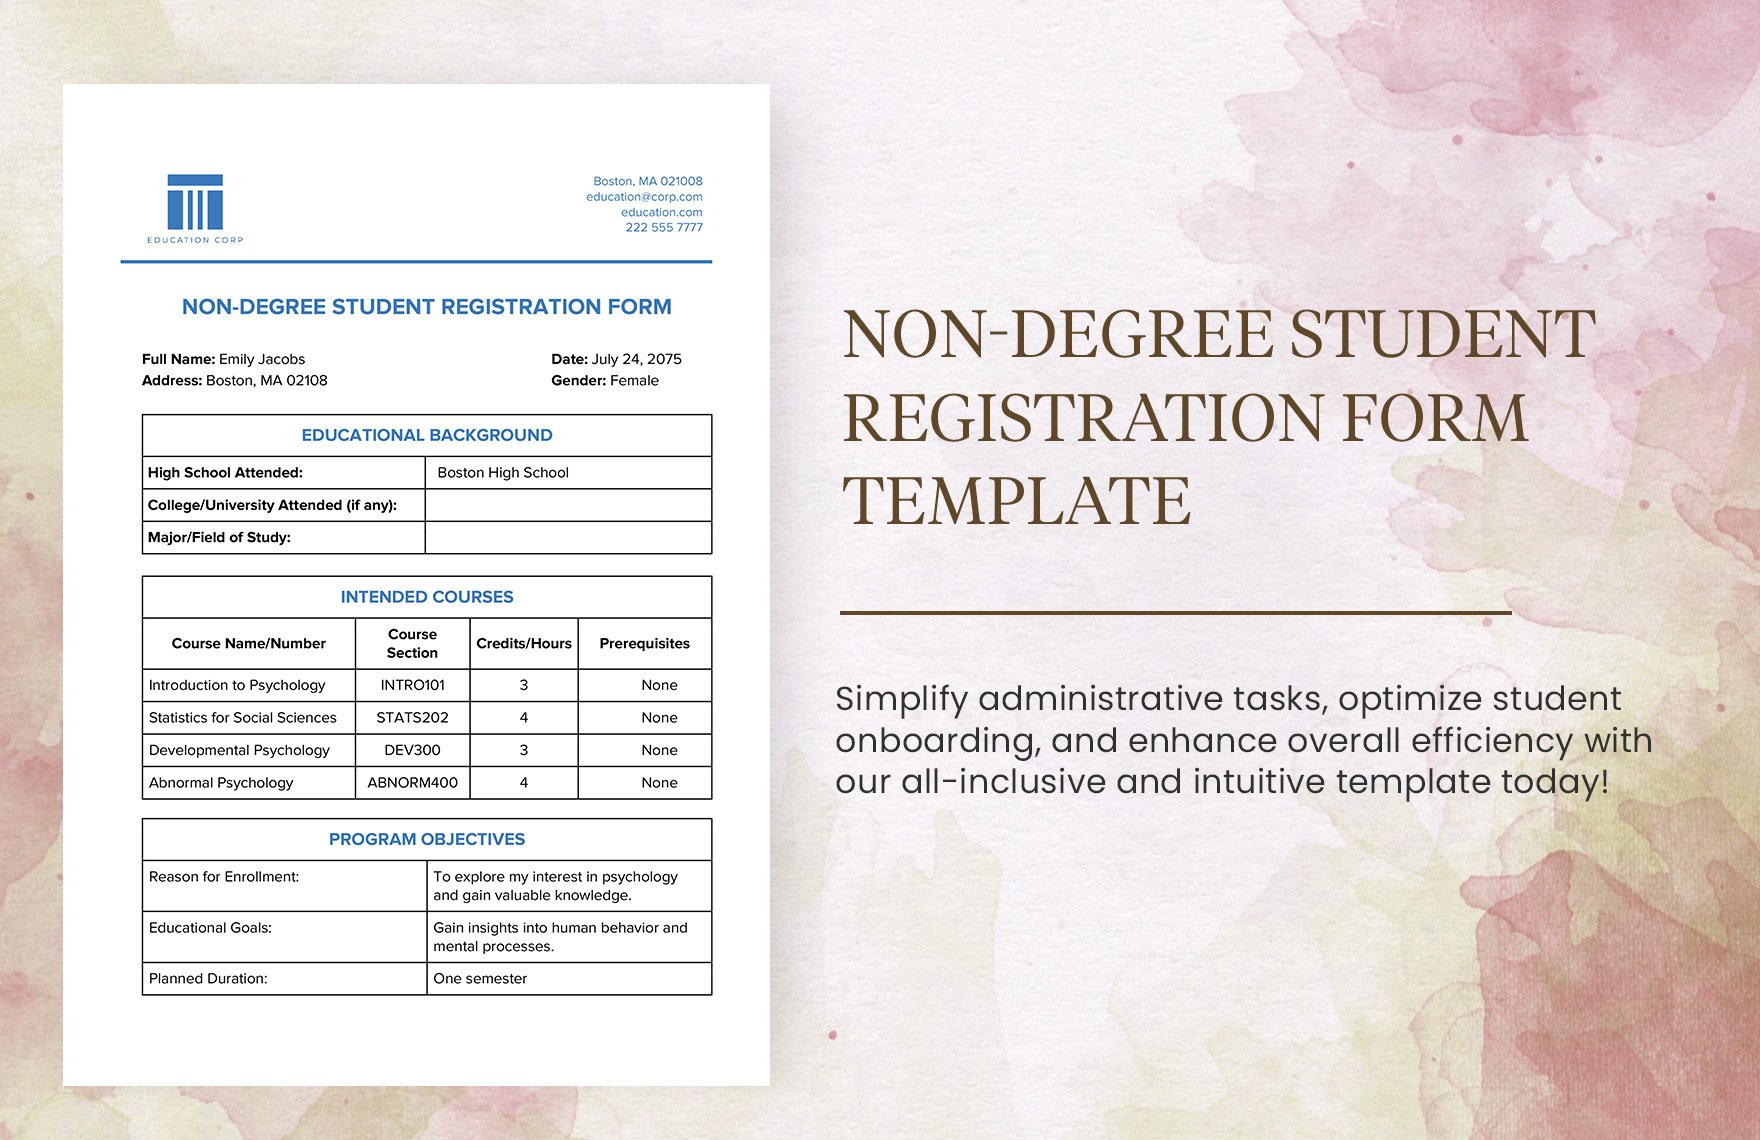 Non-Degree Student Registration Form Template